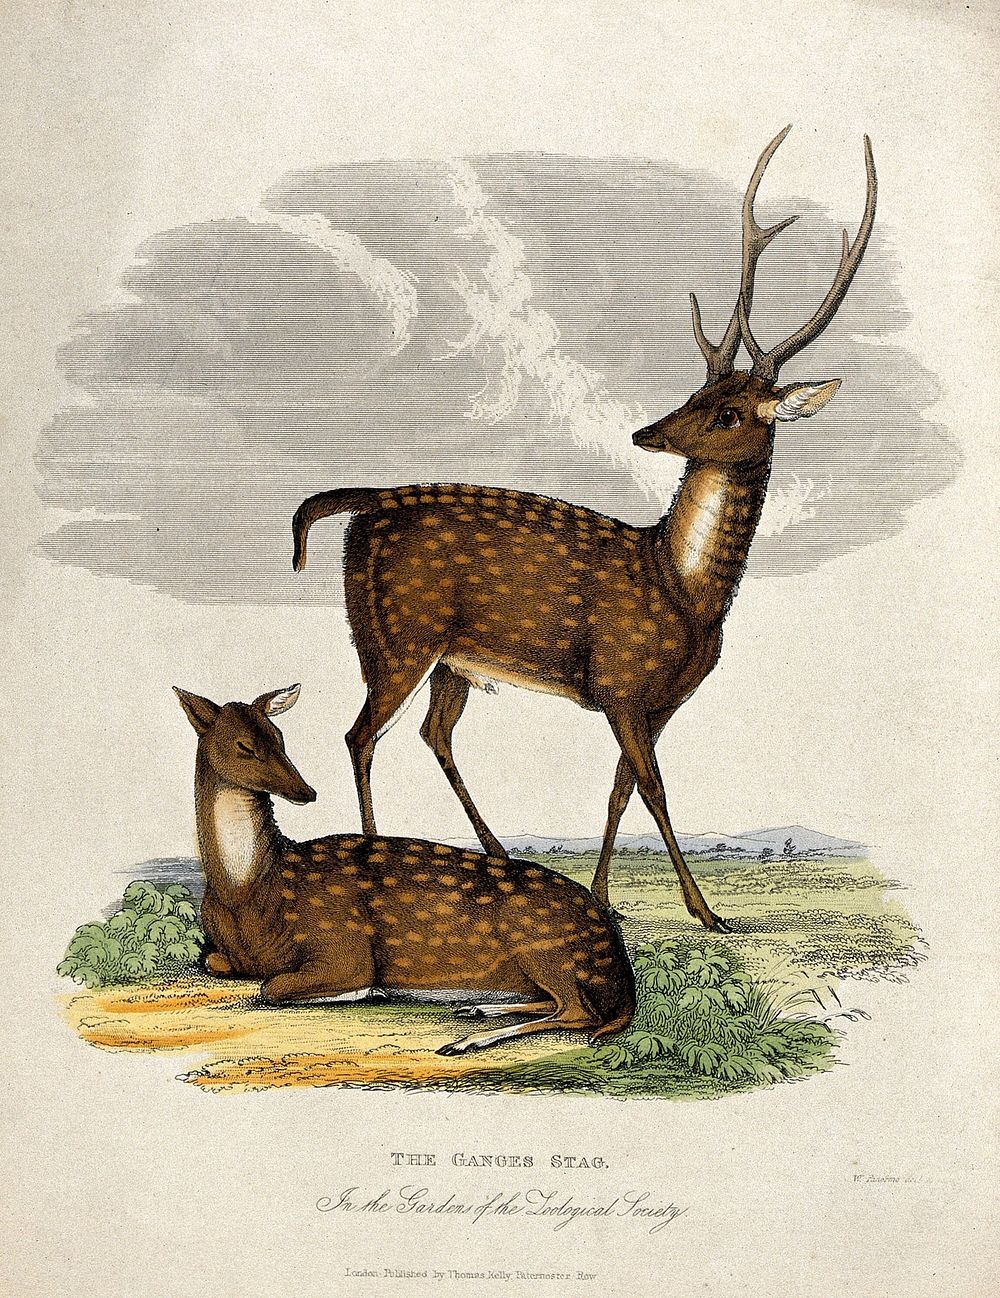 Zoological Society of London: two Ganges stags. Coloured etching by W. Panormo.